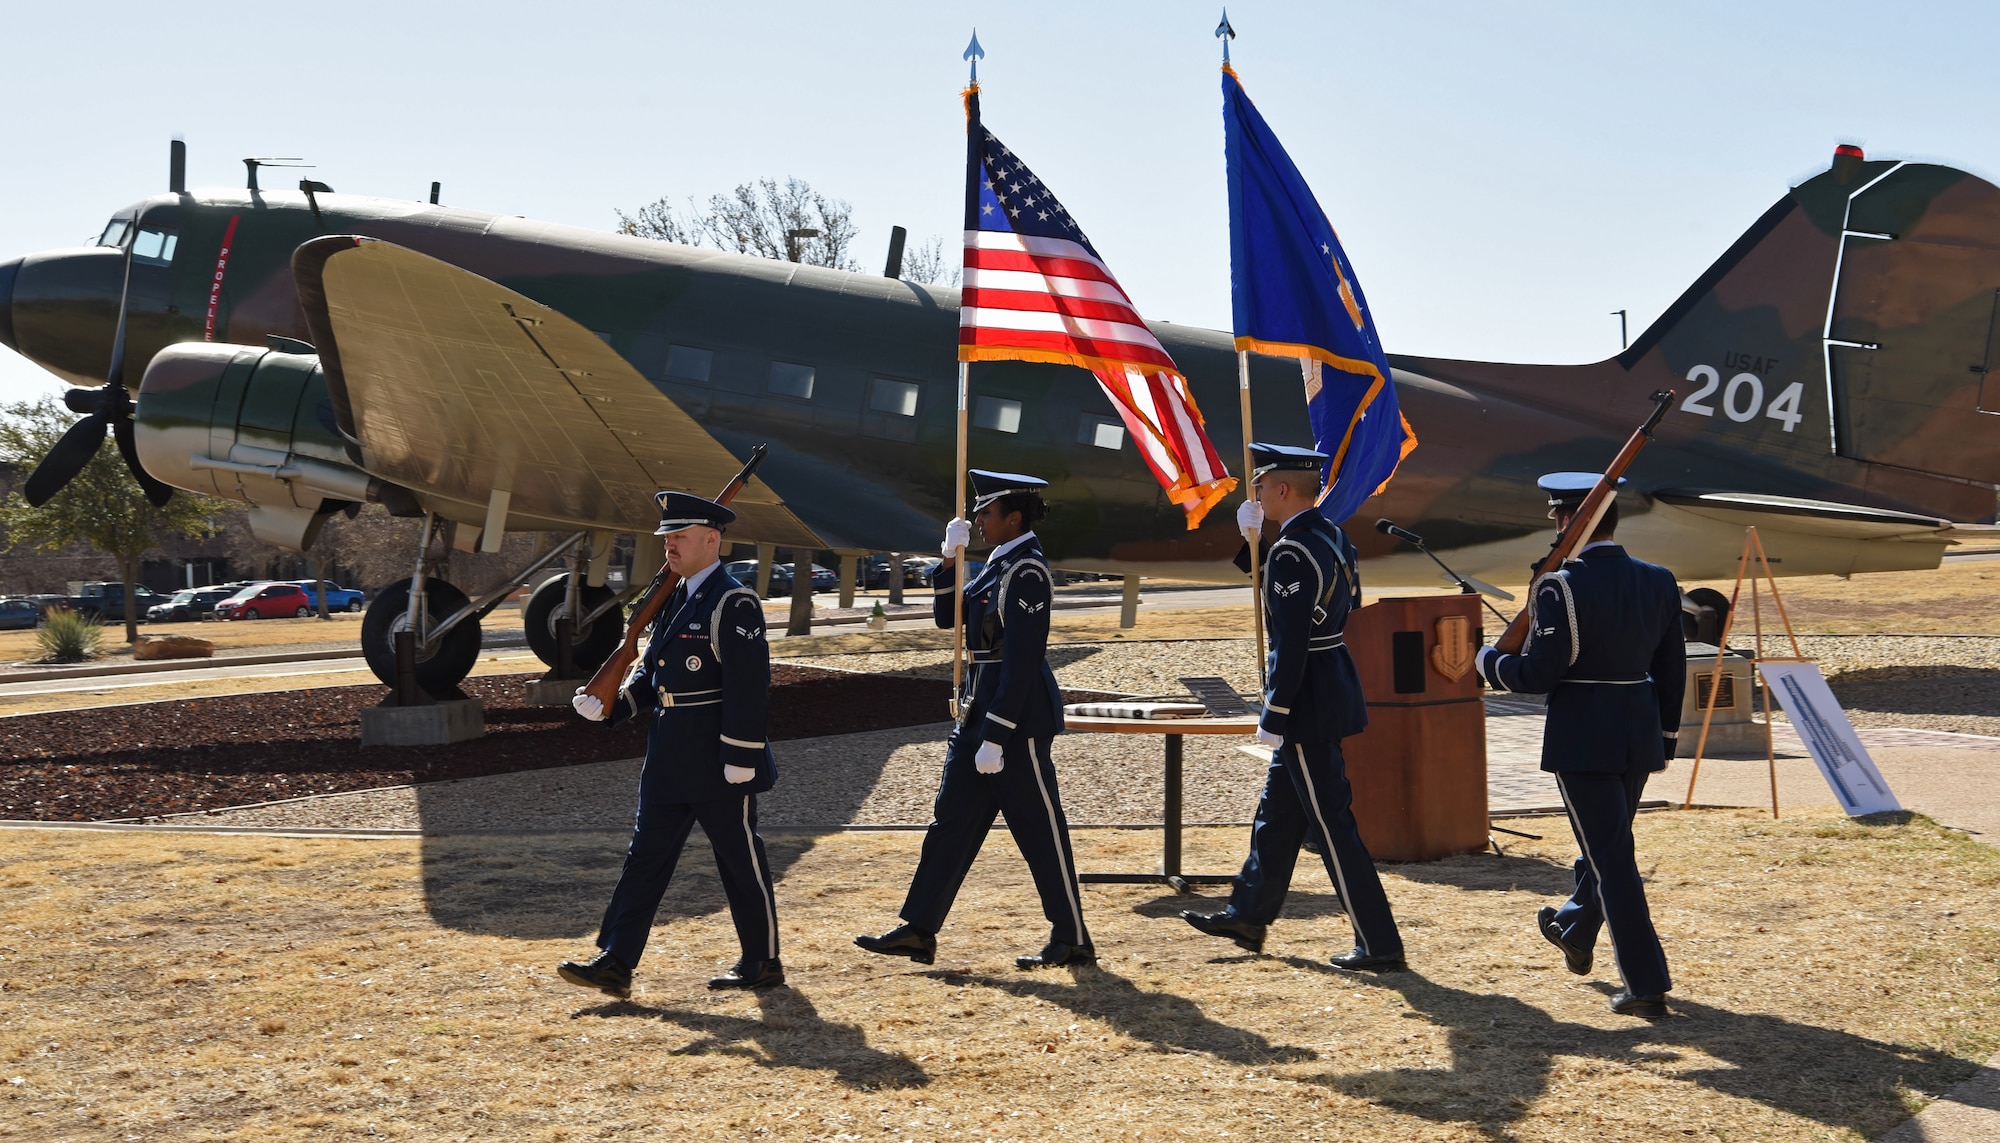 Service members assigned to the 17th Training Wing post the colors during the dedication of the Weyandt-Eddy Memorial Plaza at Goodfellow Air Force Base, Texas, March 25, 2022. The event  highlighted the United States Air Force Security Service and Tactical Air Command and their efforts to fulfill their cryptographic, communication intelligence mission. (U.S. Air Force photo by Senior Airman Abbey Rieves)